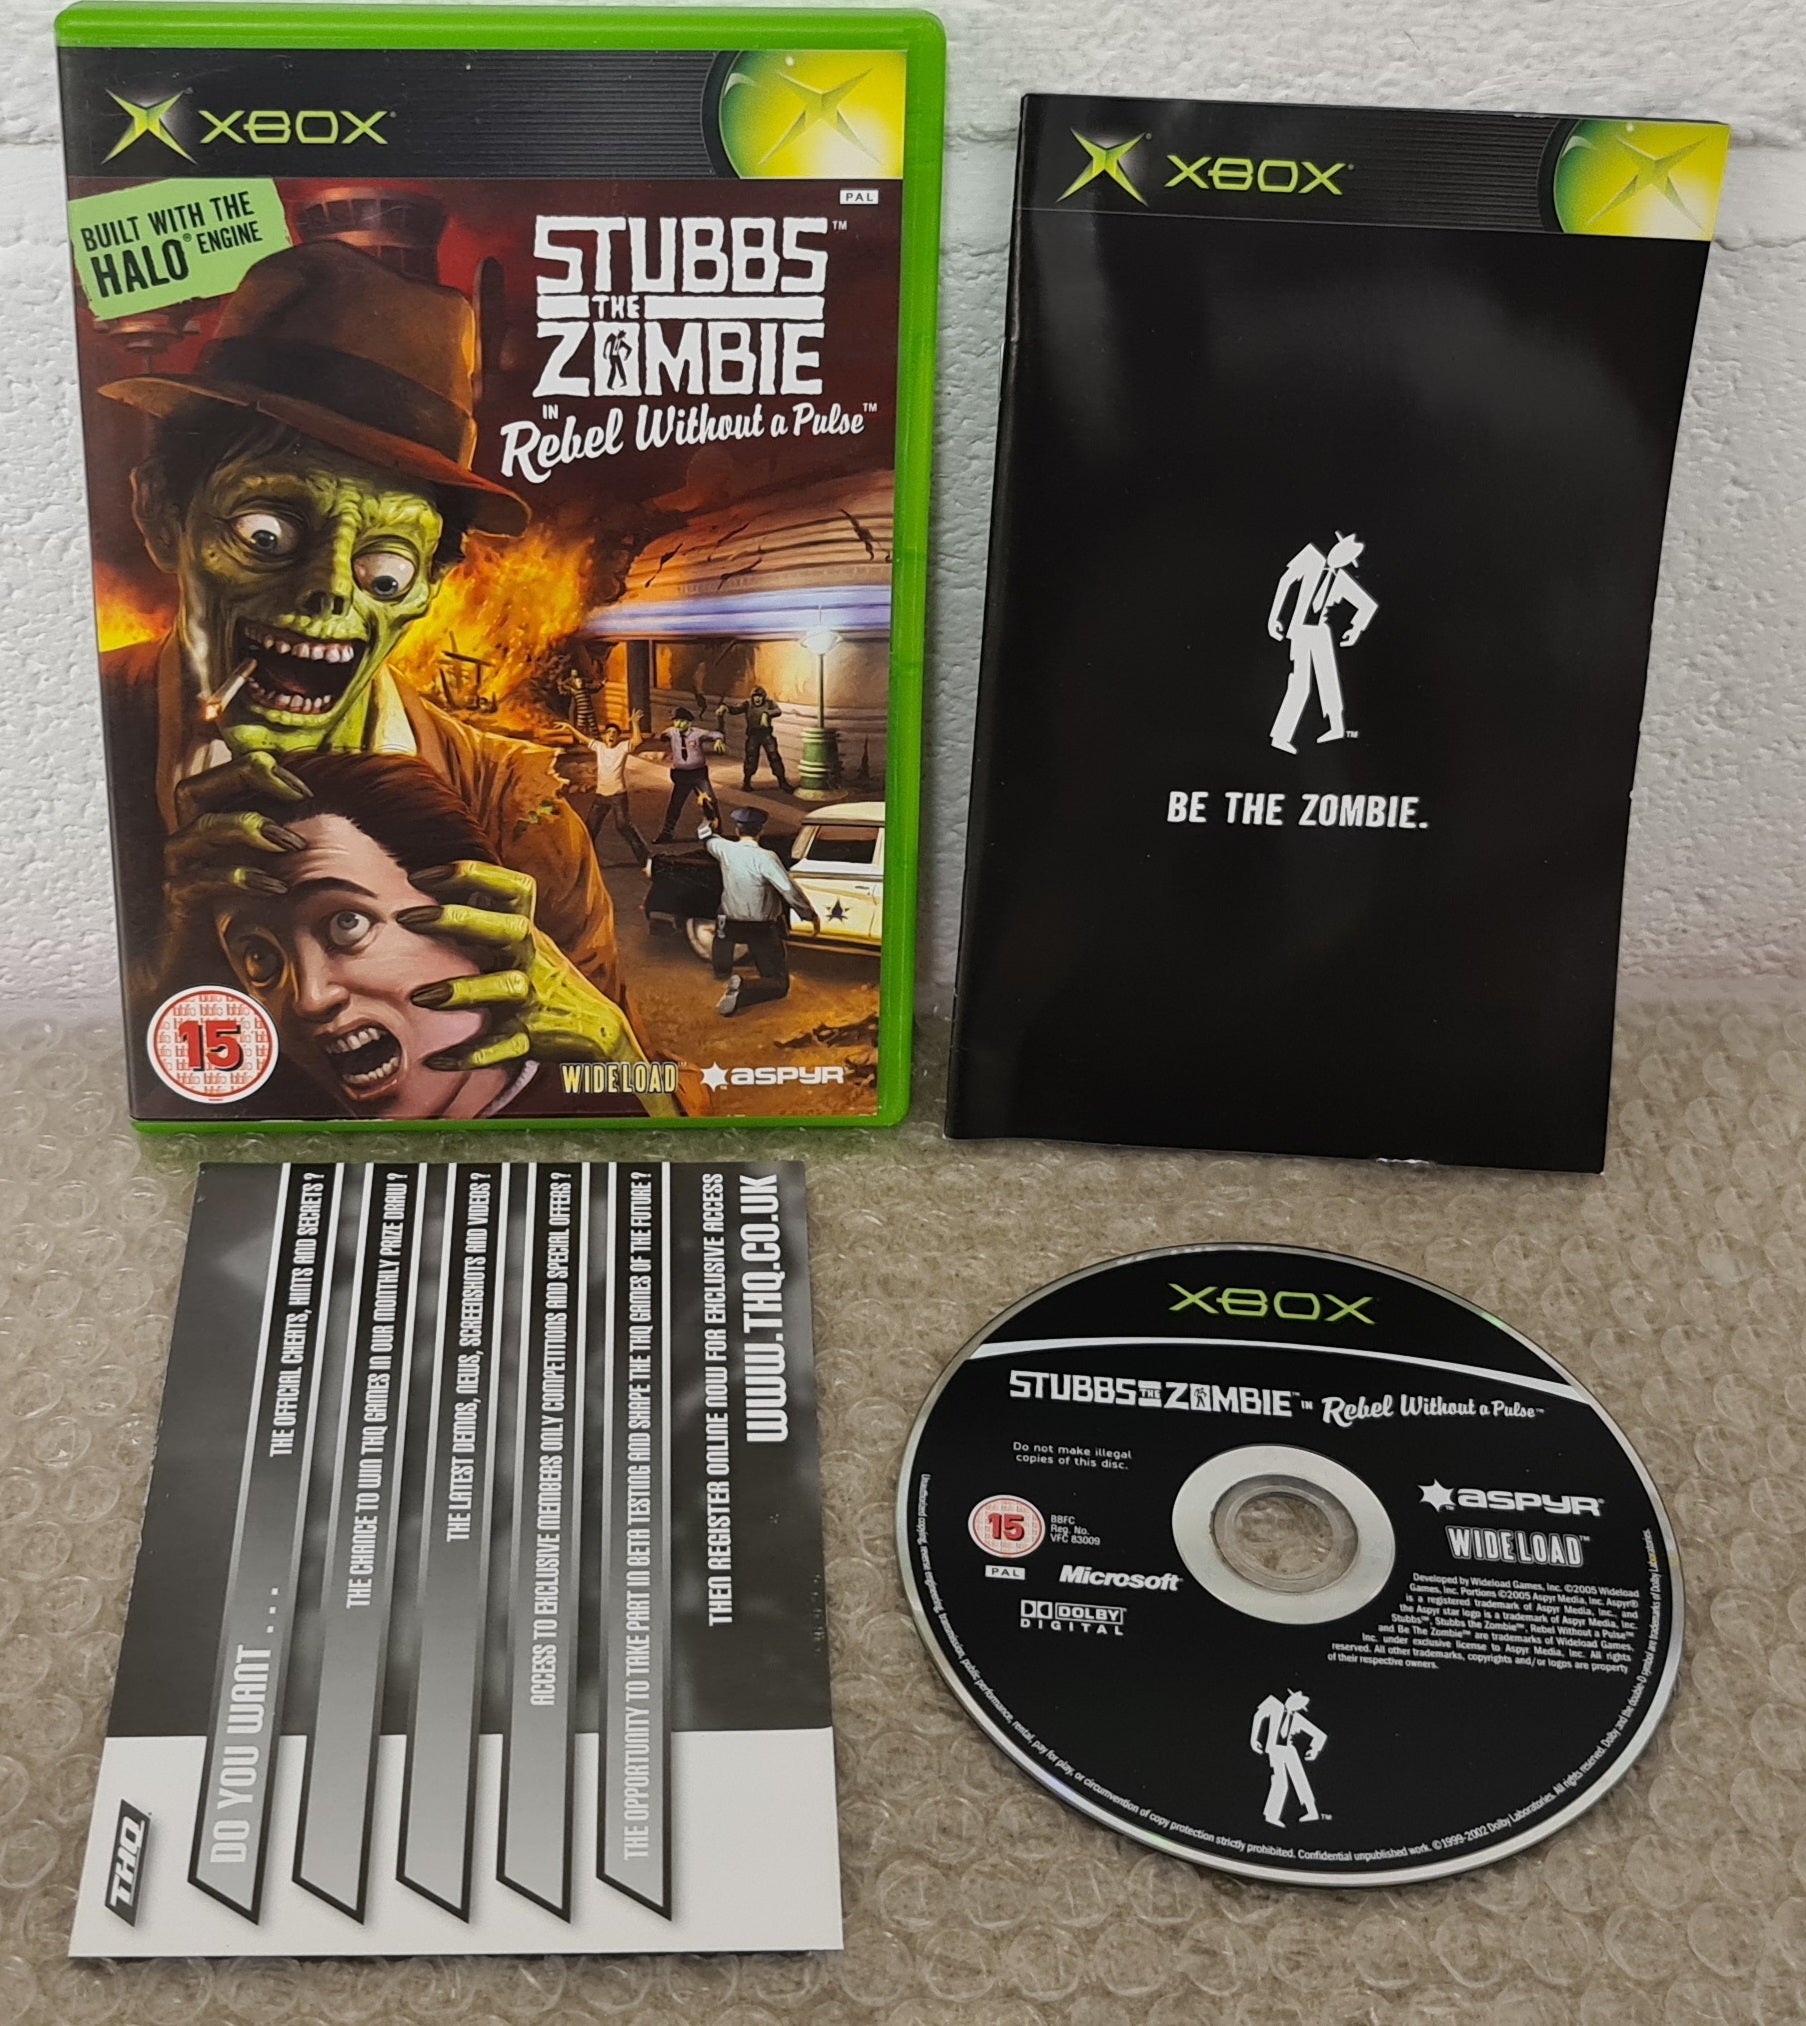 Stubbs the Zombie Rebel Without a Pulse Microsoft Xbox Game 